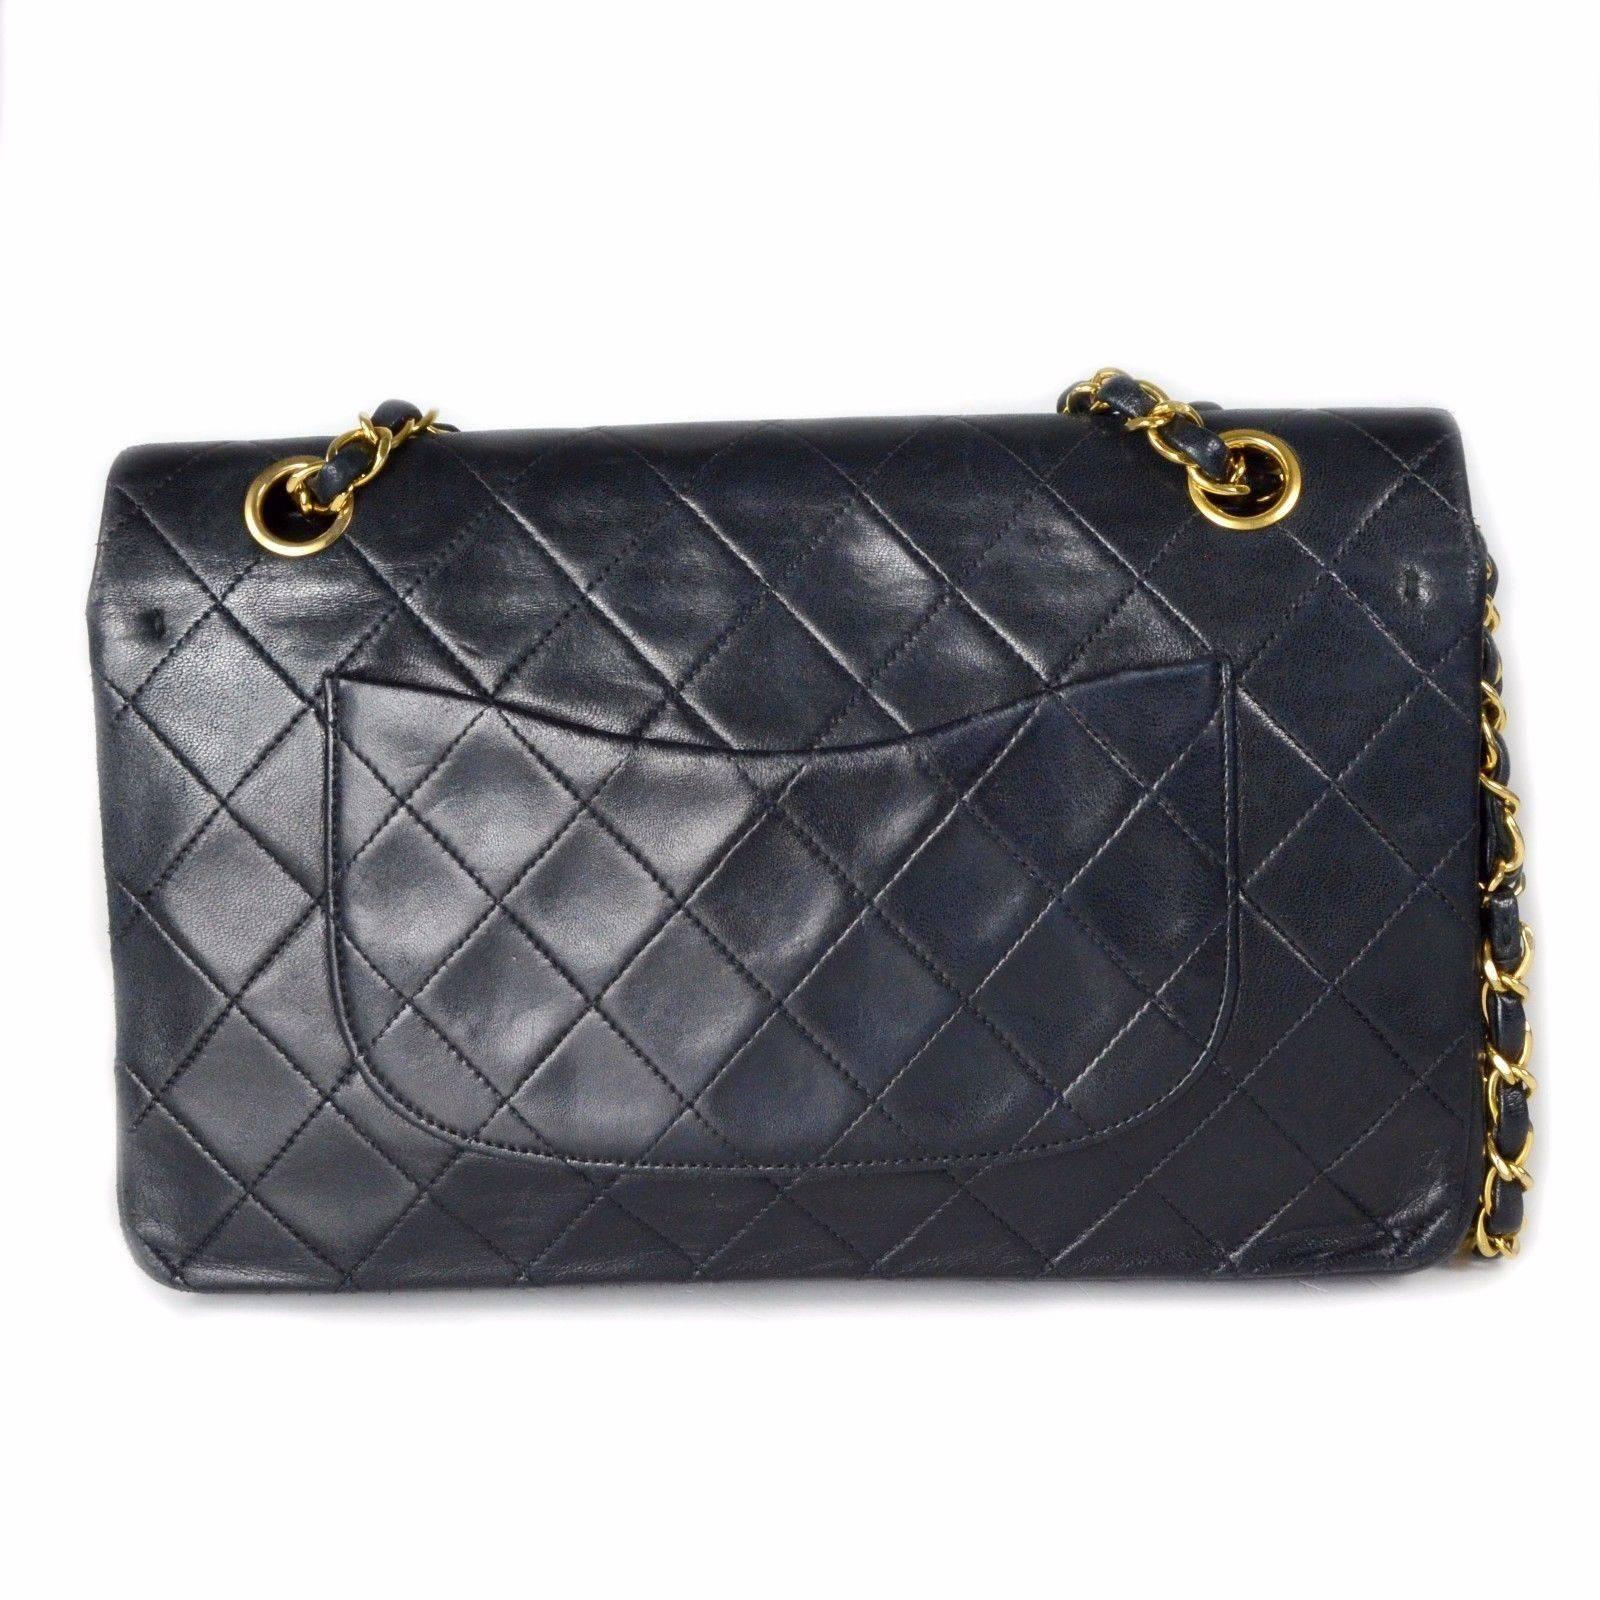 Chanel Medium Black Leather Bag - Quilted Double Flap CC Gold Shoulder Handbag In Good Condition In Prahran, Victoria